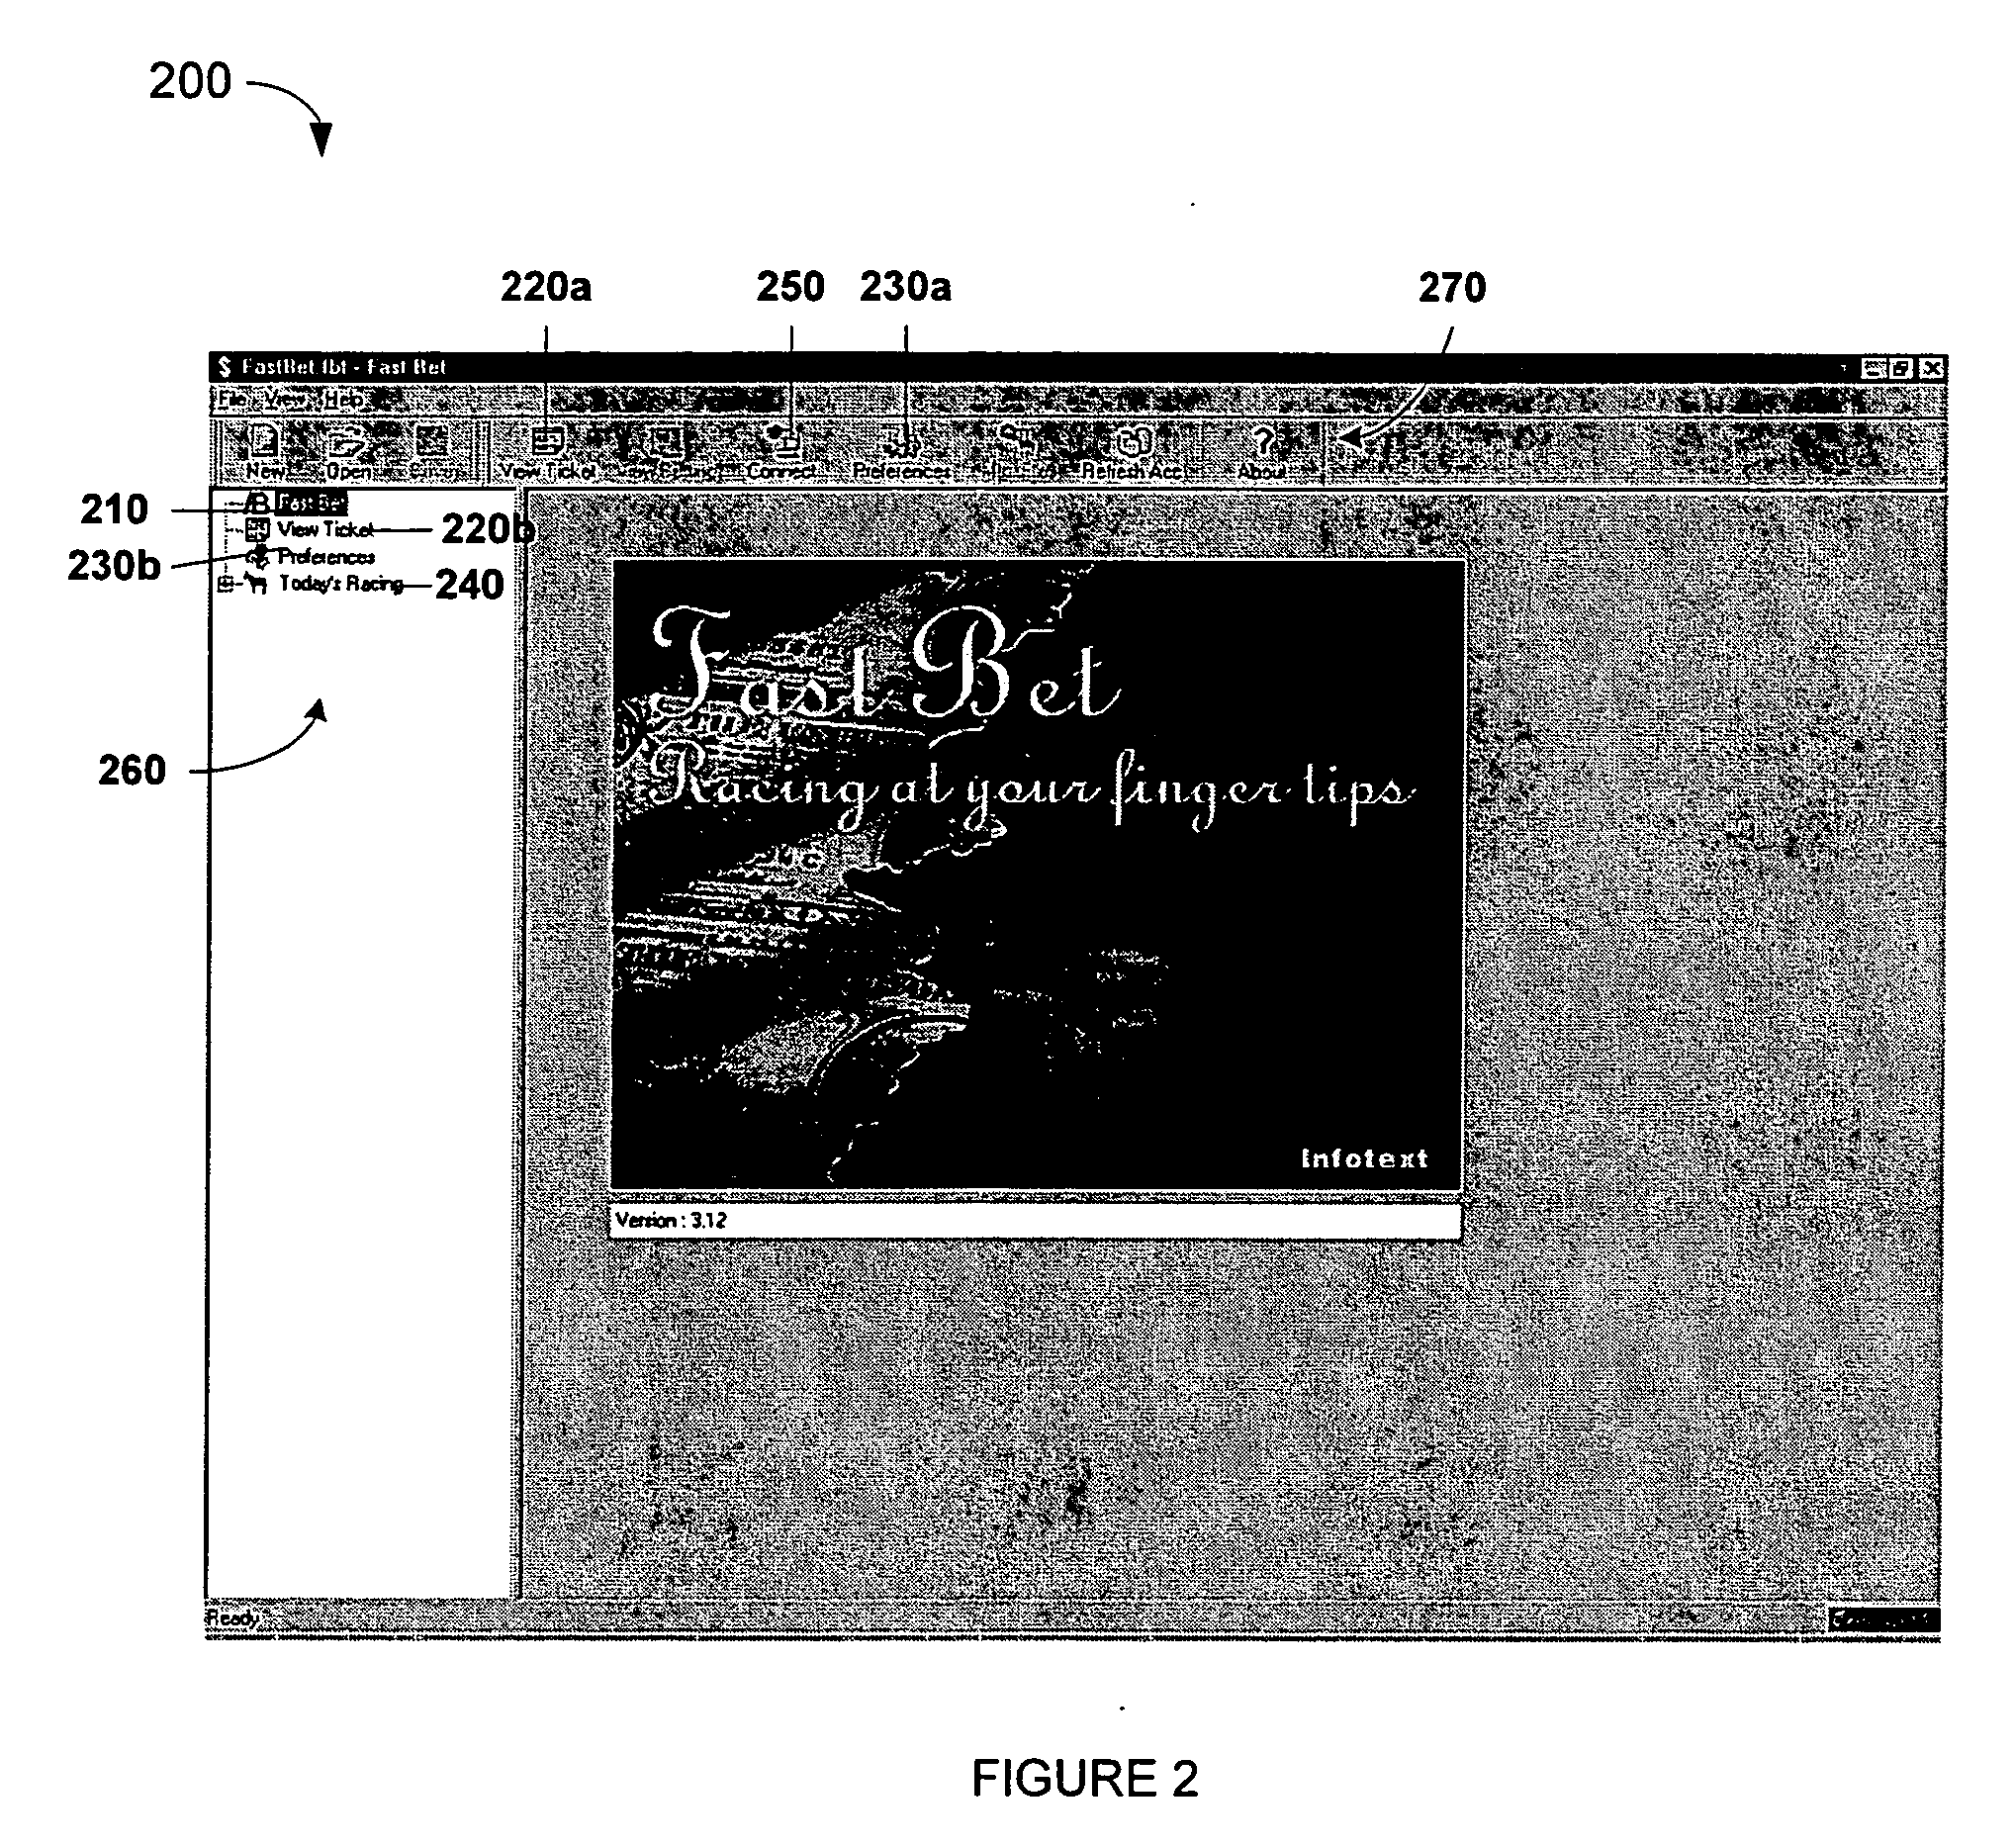 System and method for interactive wagering from a remote location